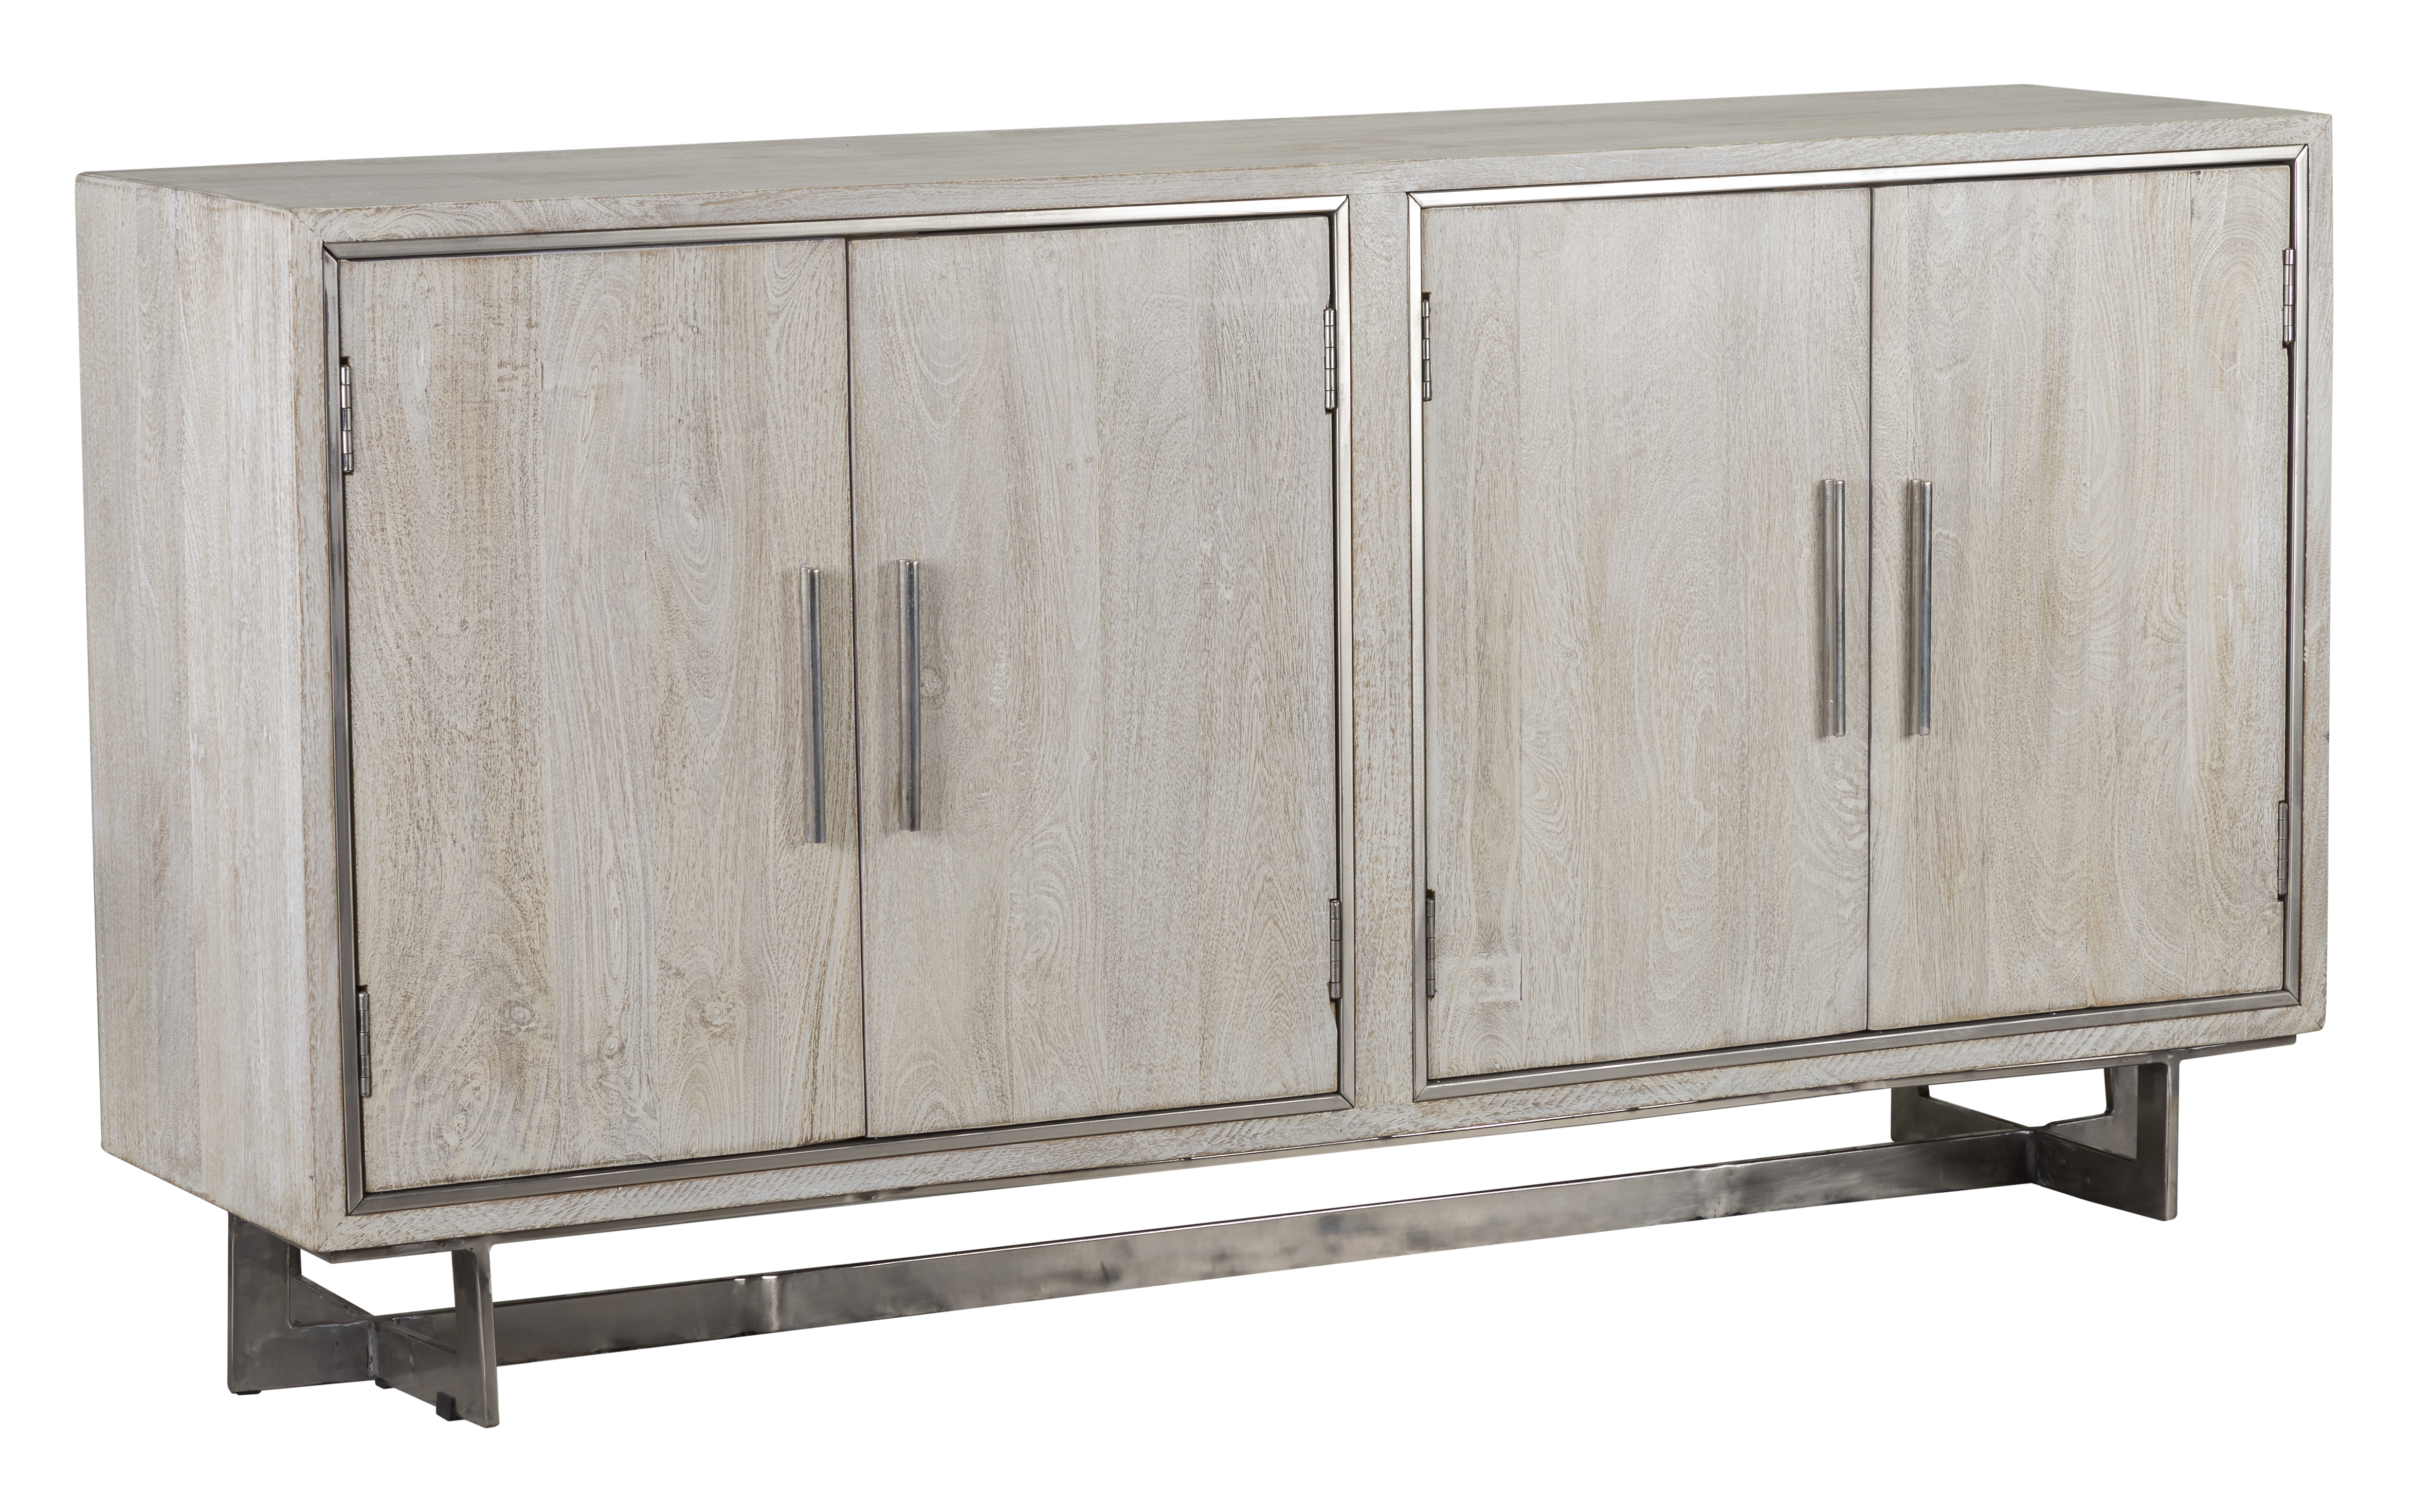 Desmond sideboard in white from Classic Home